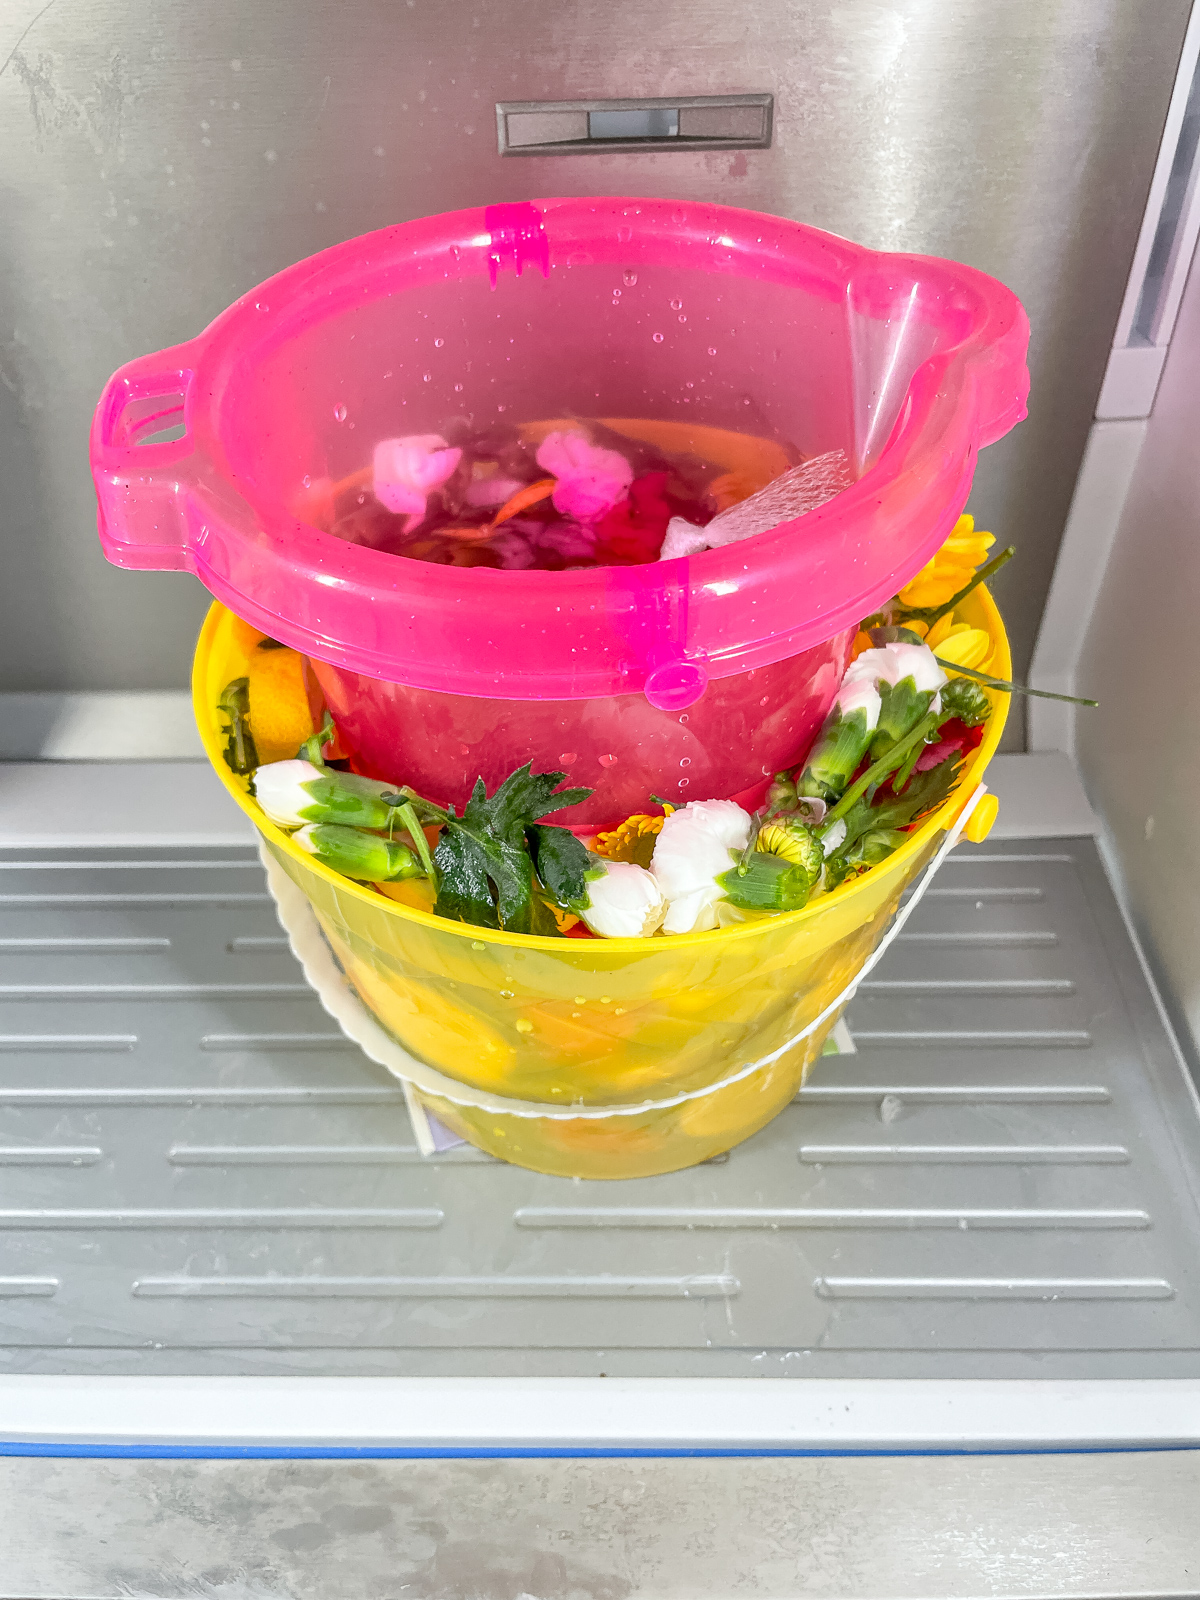 Cheap $1 bins make great buckets for turning your upper drawer freezer into  a huge ice bucket. In a house of 12 ice goes quick in the summer :  r/lifehacks